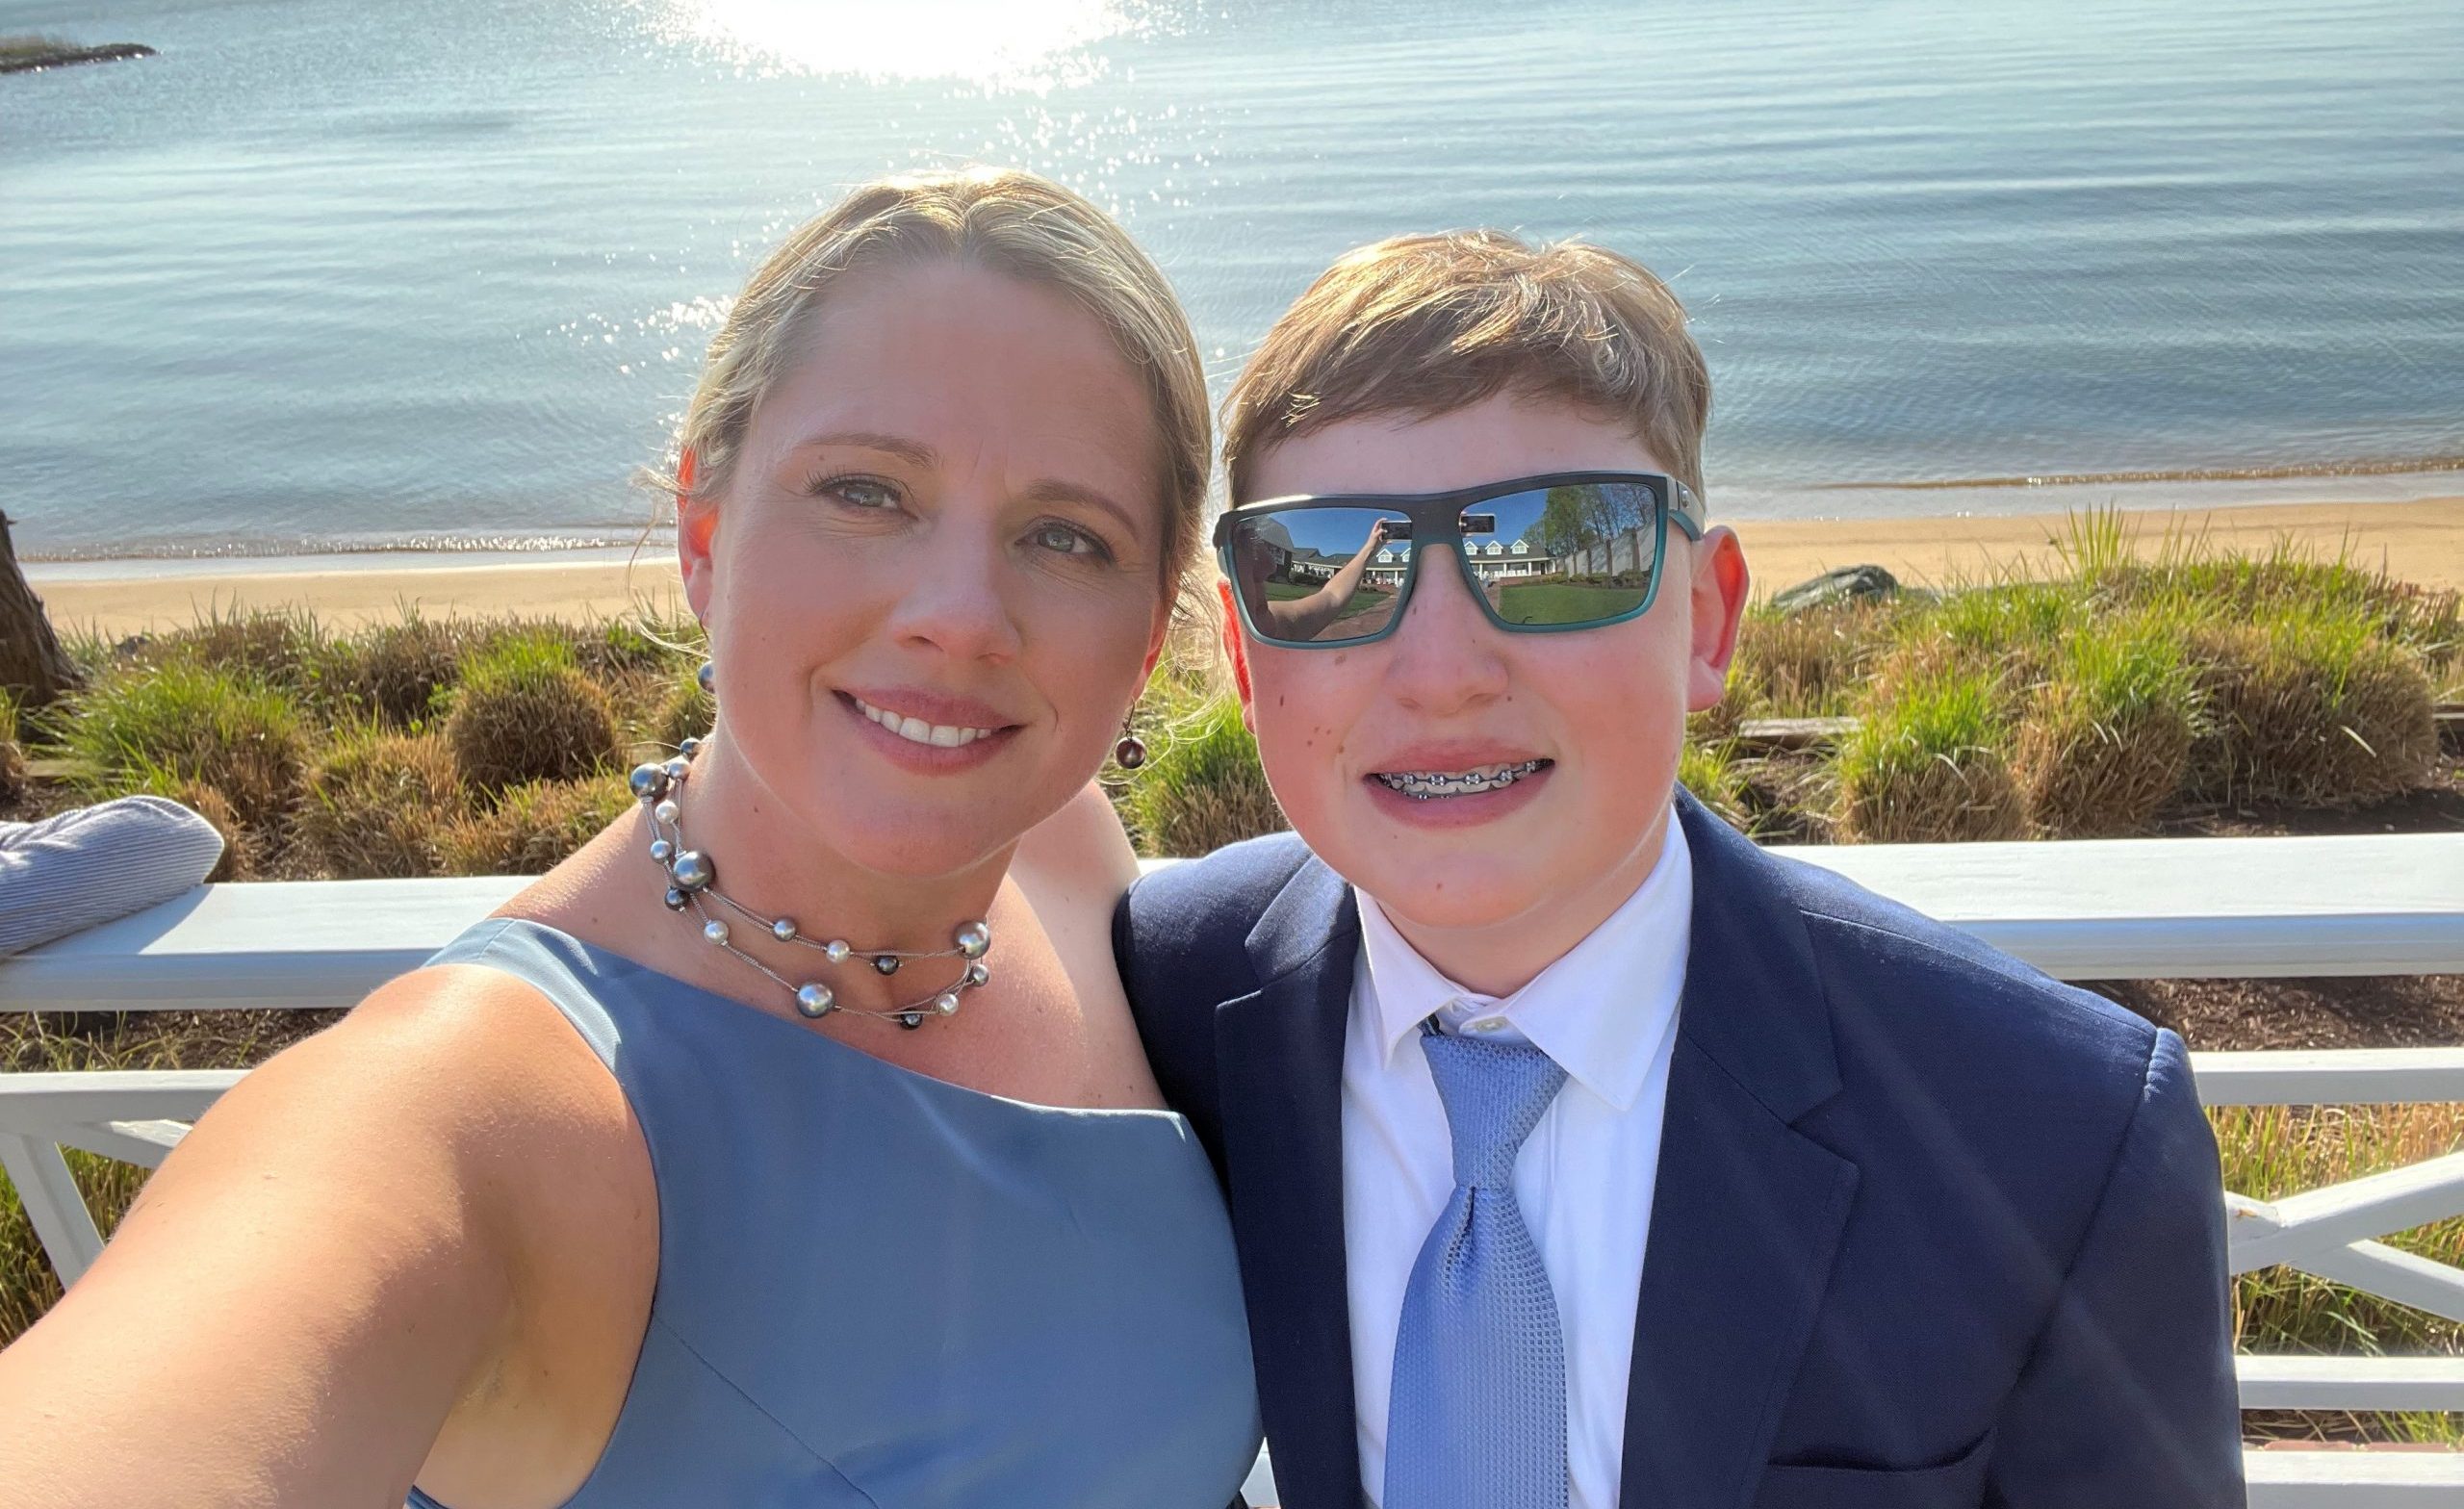 From Healthy to Heart Condition: A Mother's Account of Her Son's Myocarditis Battle